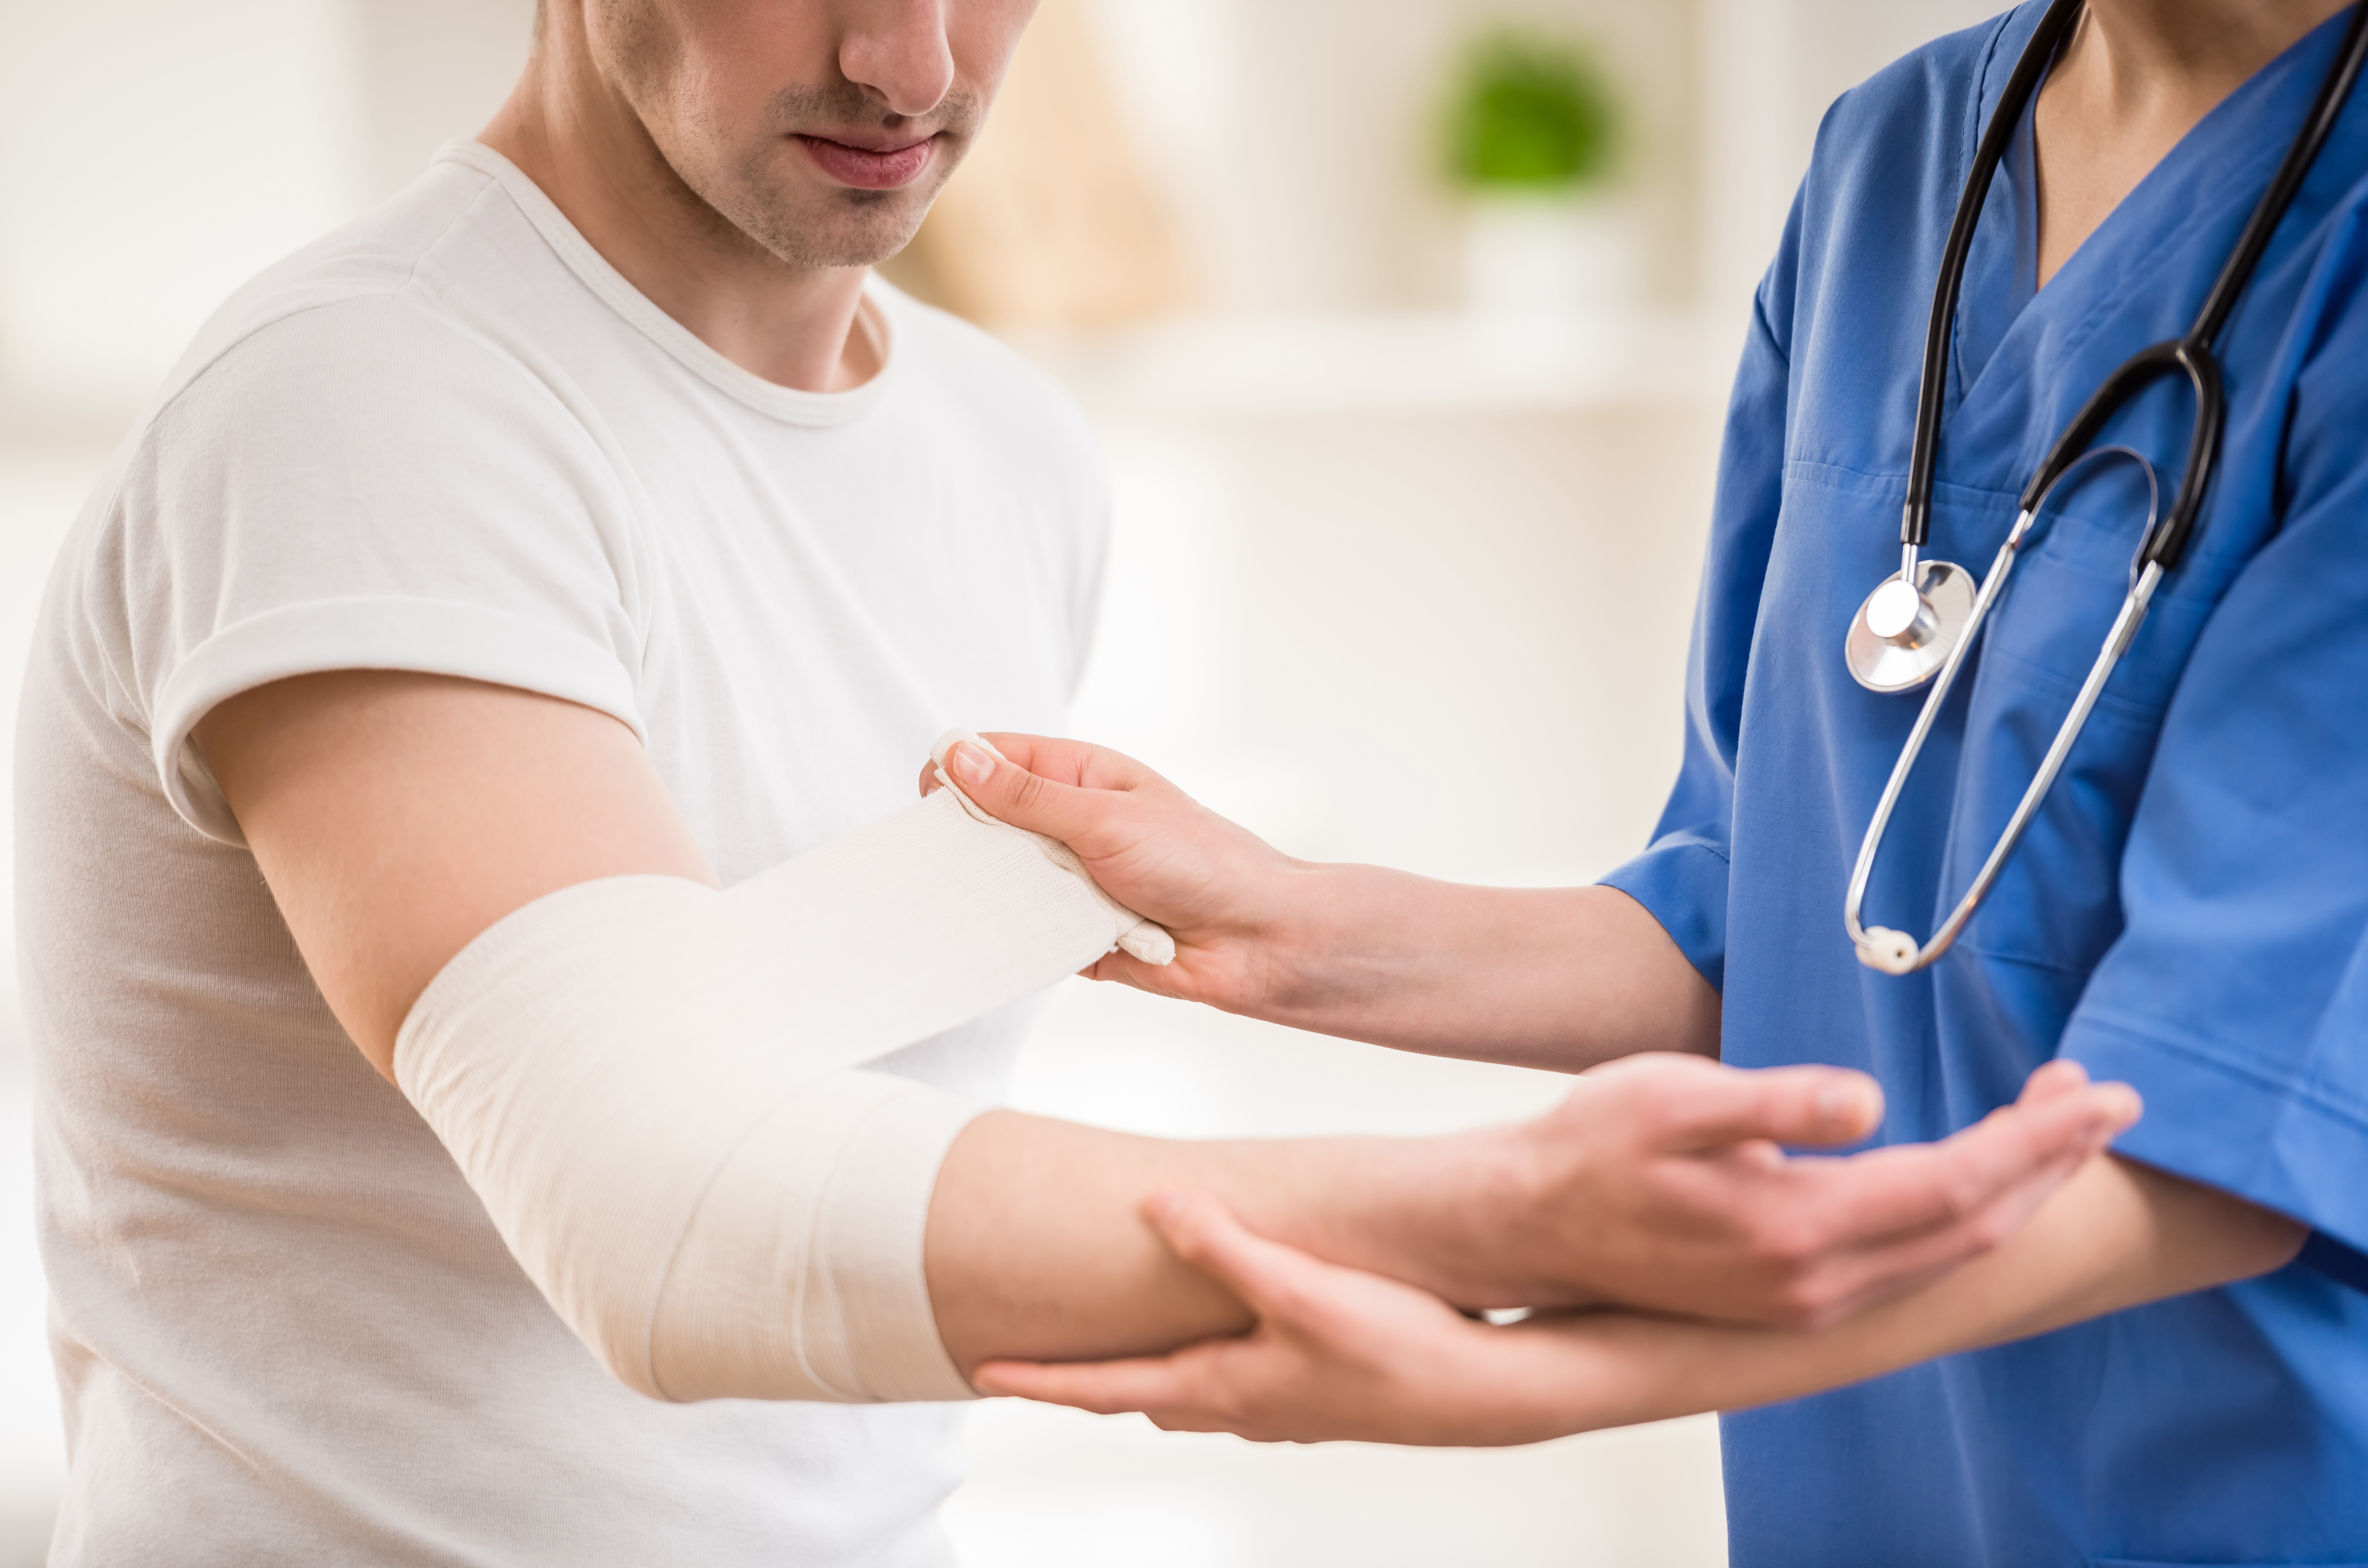 5 Tips on First Aid for Cuts and Wounds